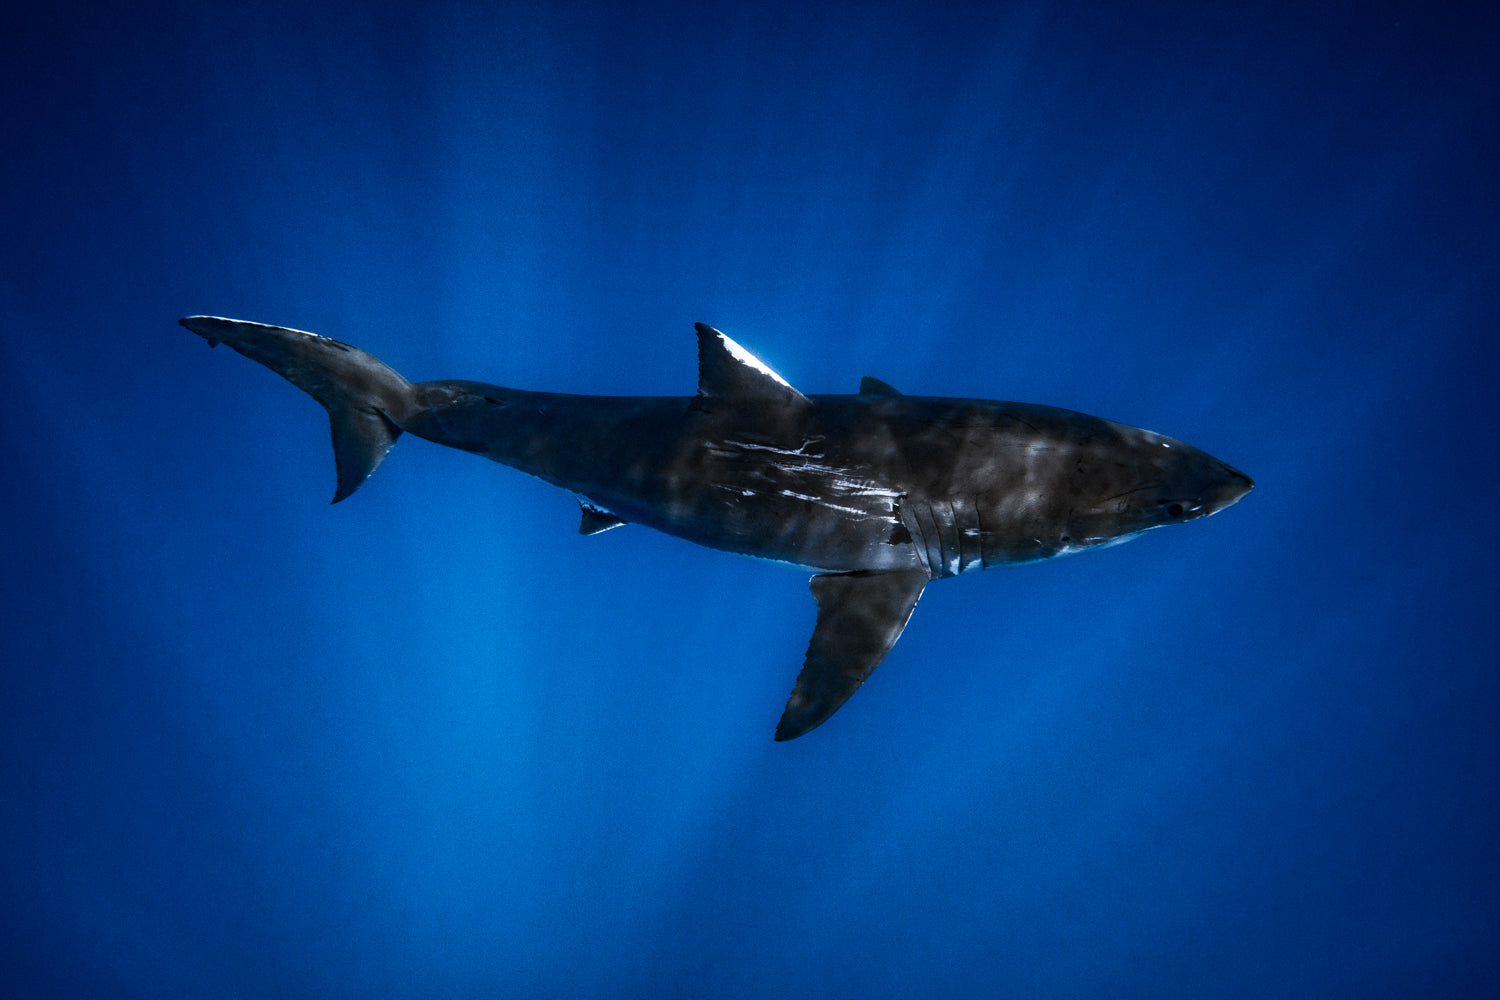 The body of a Great White Shark in the Deep Blue Sea